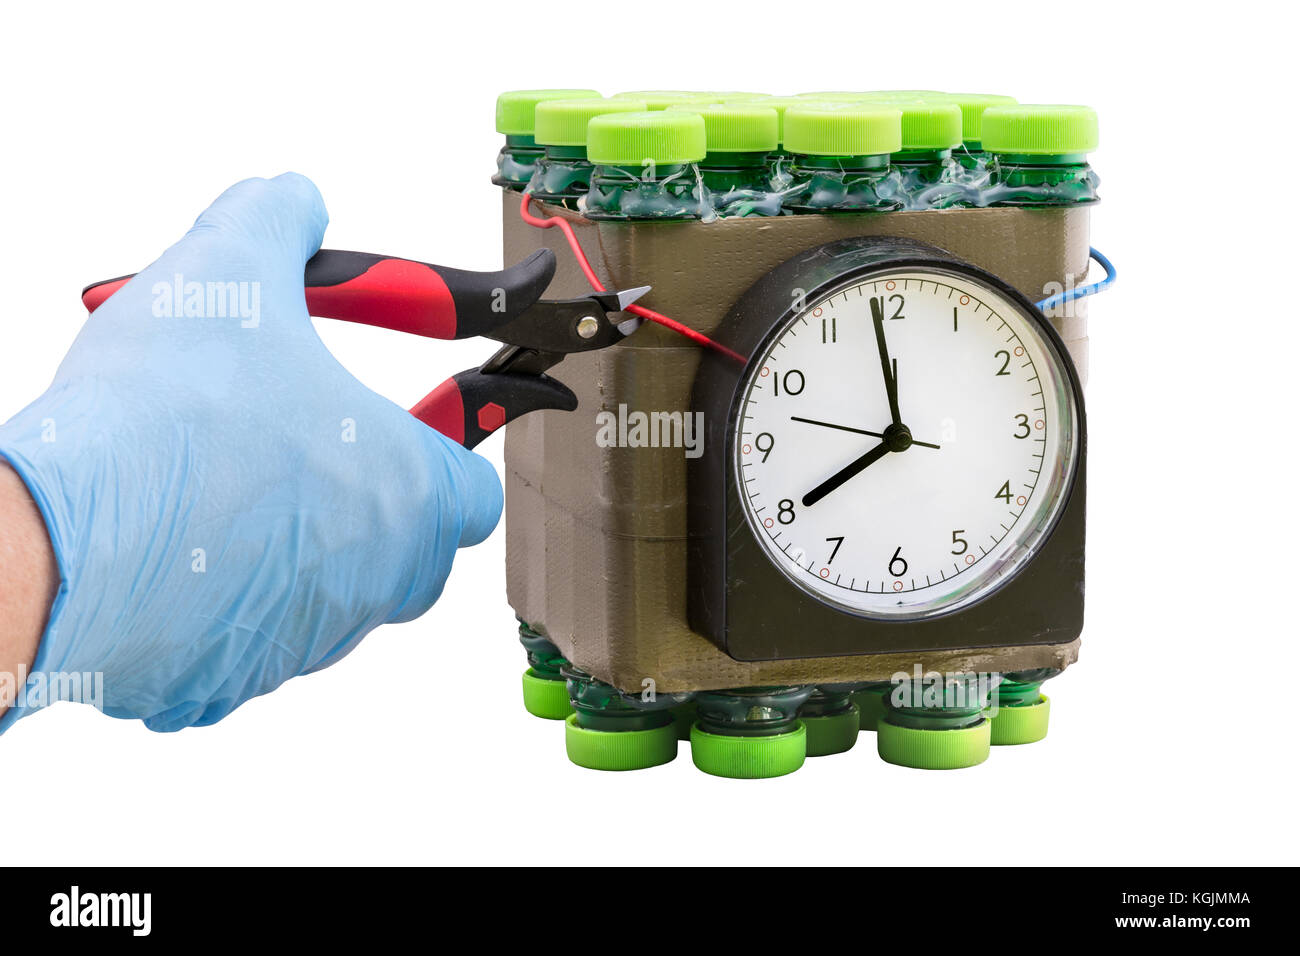 Deactivation of found timed bomb by expert. Disposal of dangerous explosive. Isolated on white background. Stock Photo